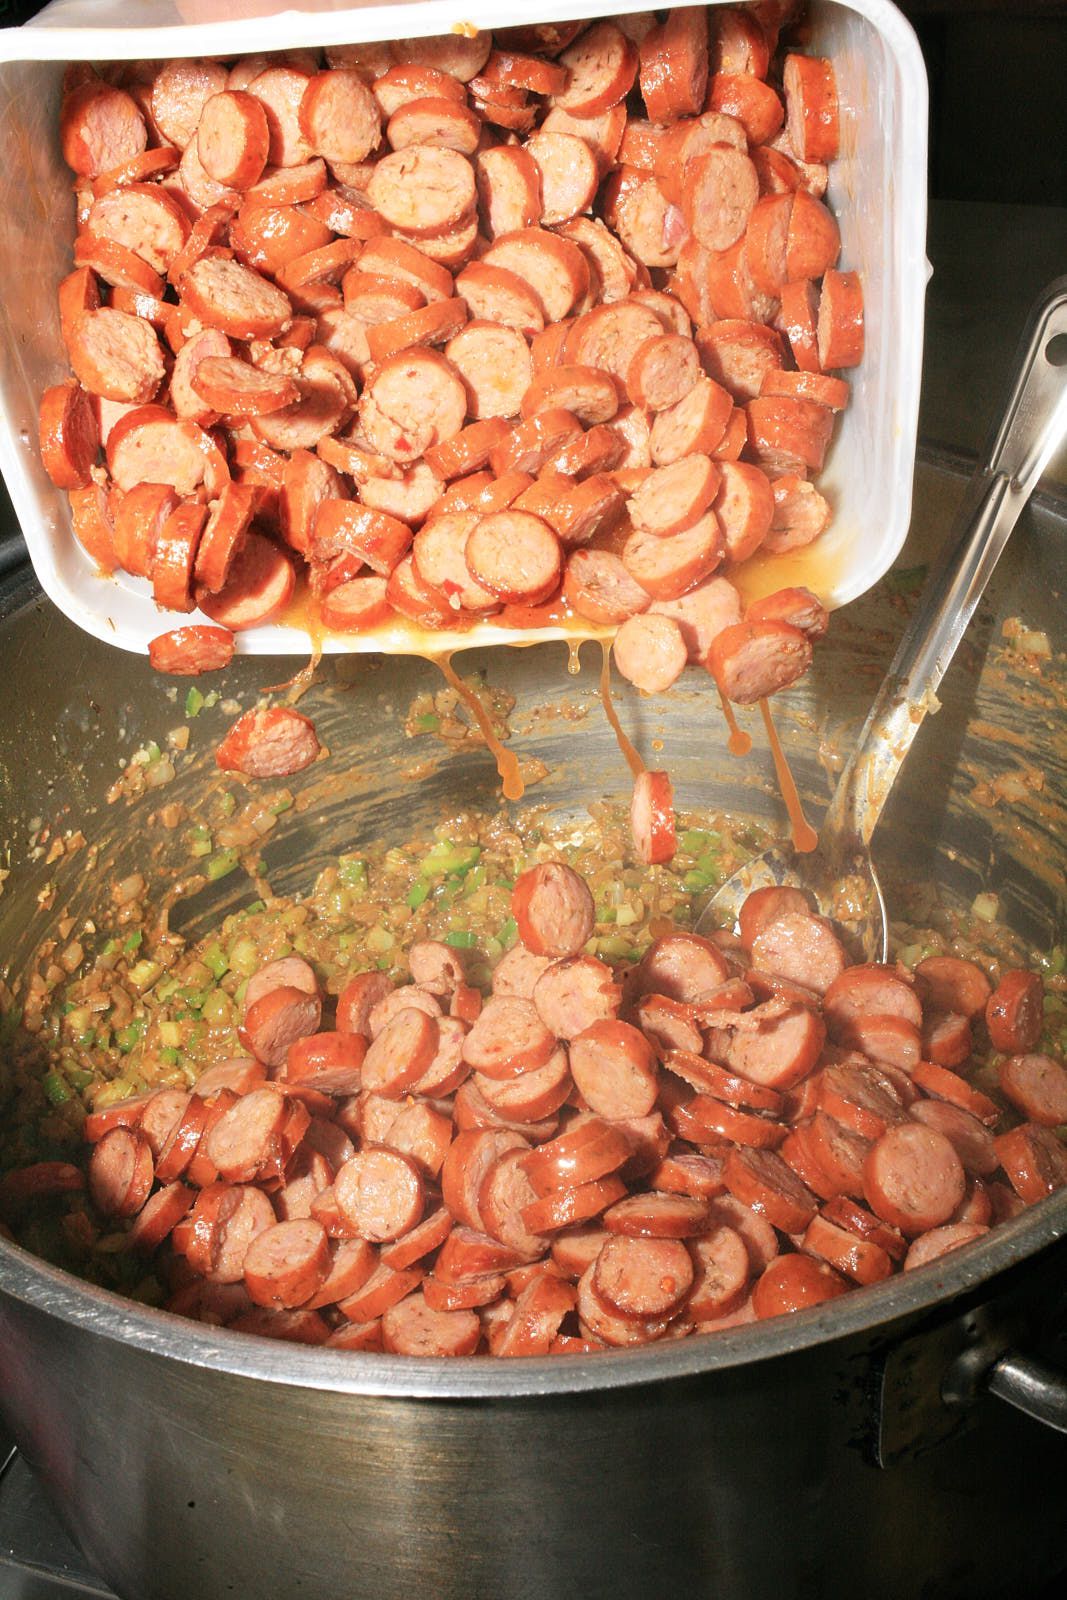 A tub of andouille sausage, cut into coins, is poured into the gumbo pot.